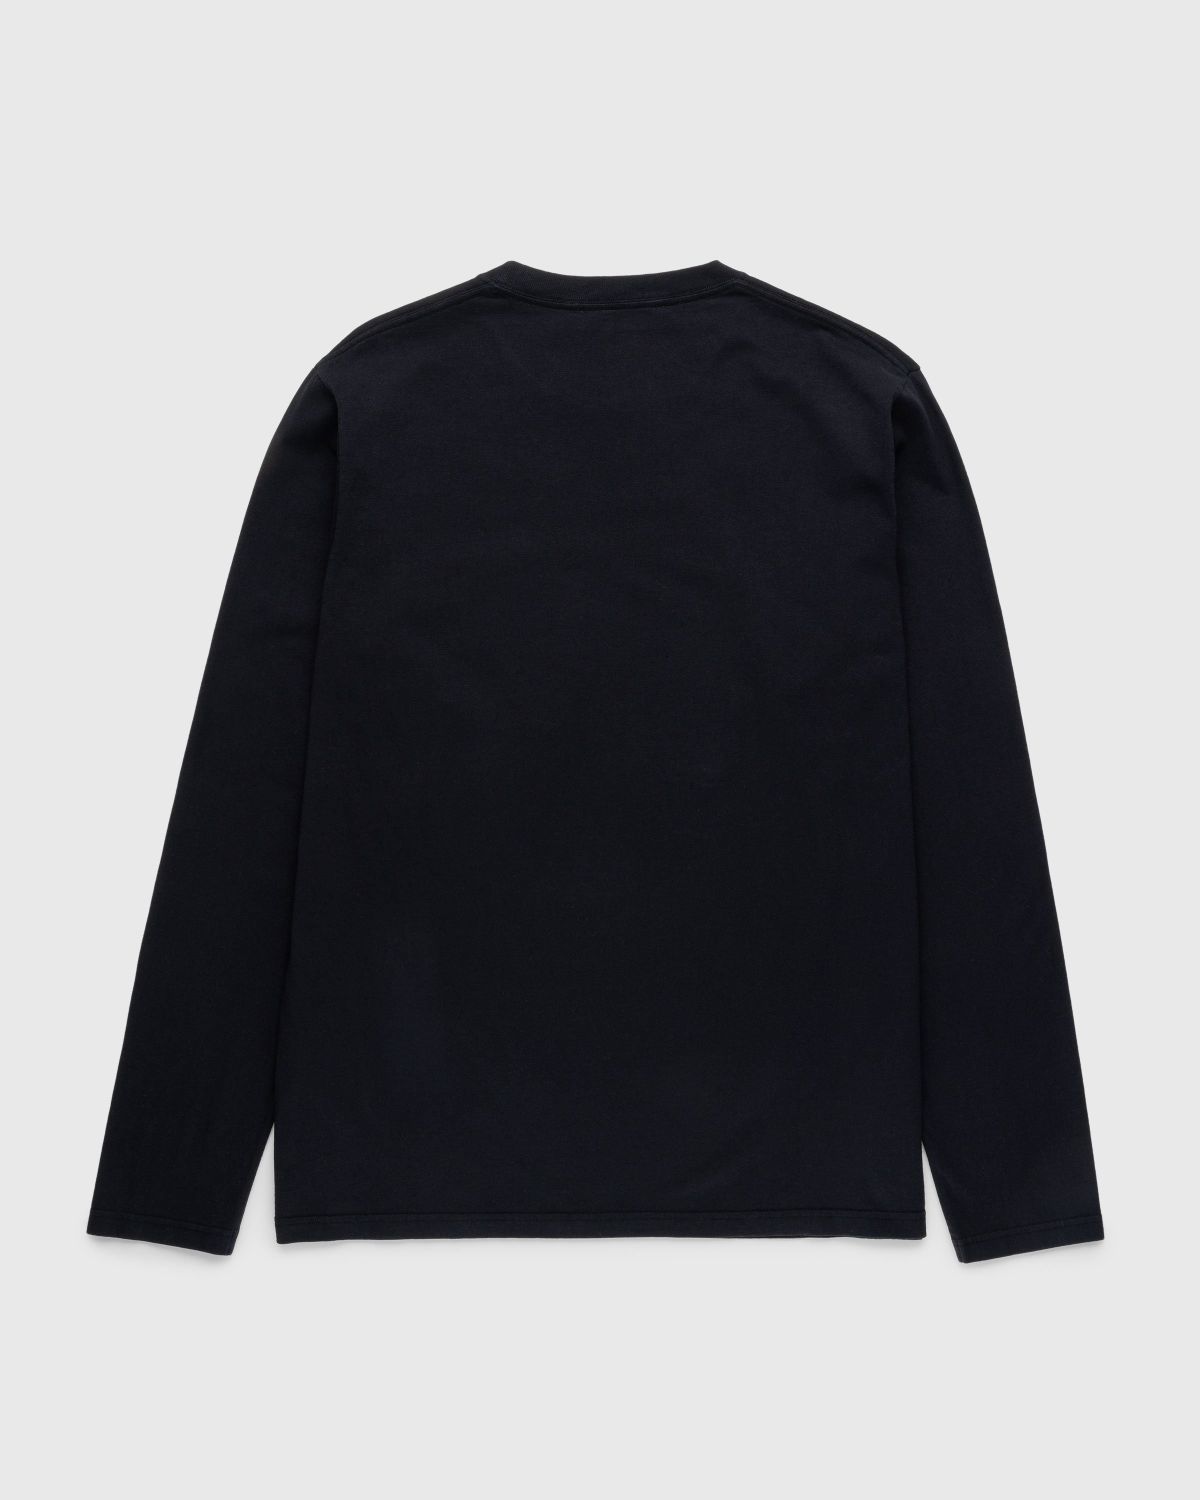 Highsnobiety HS05 – Pigment Dyed Boxy Long Sleeves Jersey Black - Longsleeves - Black - Image 2